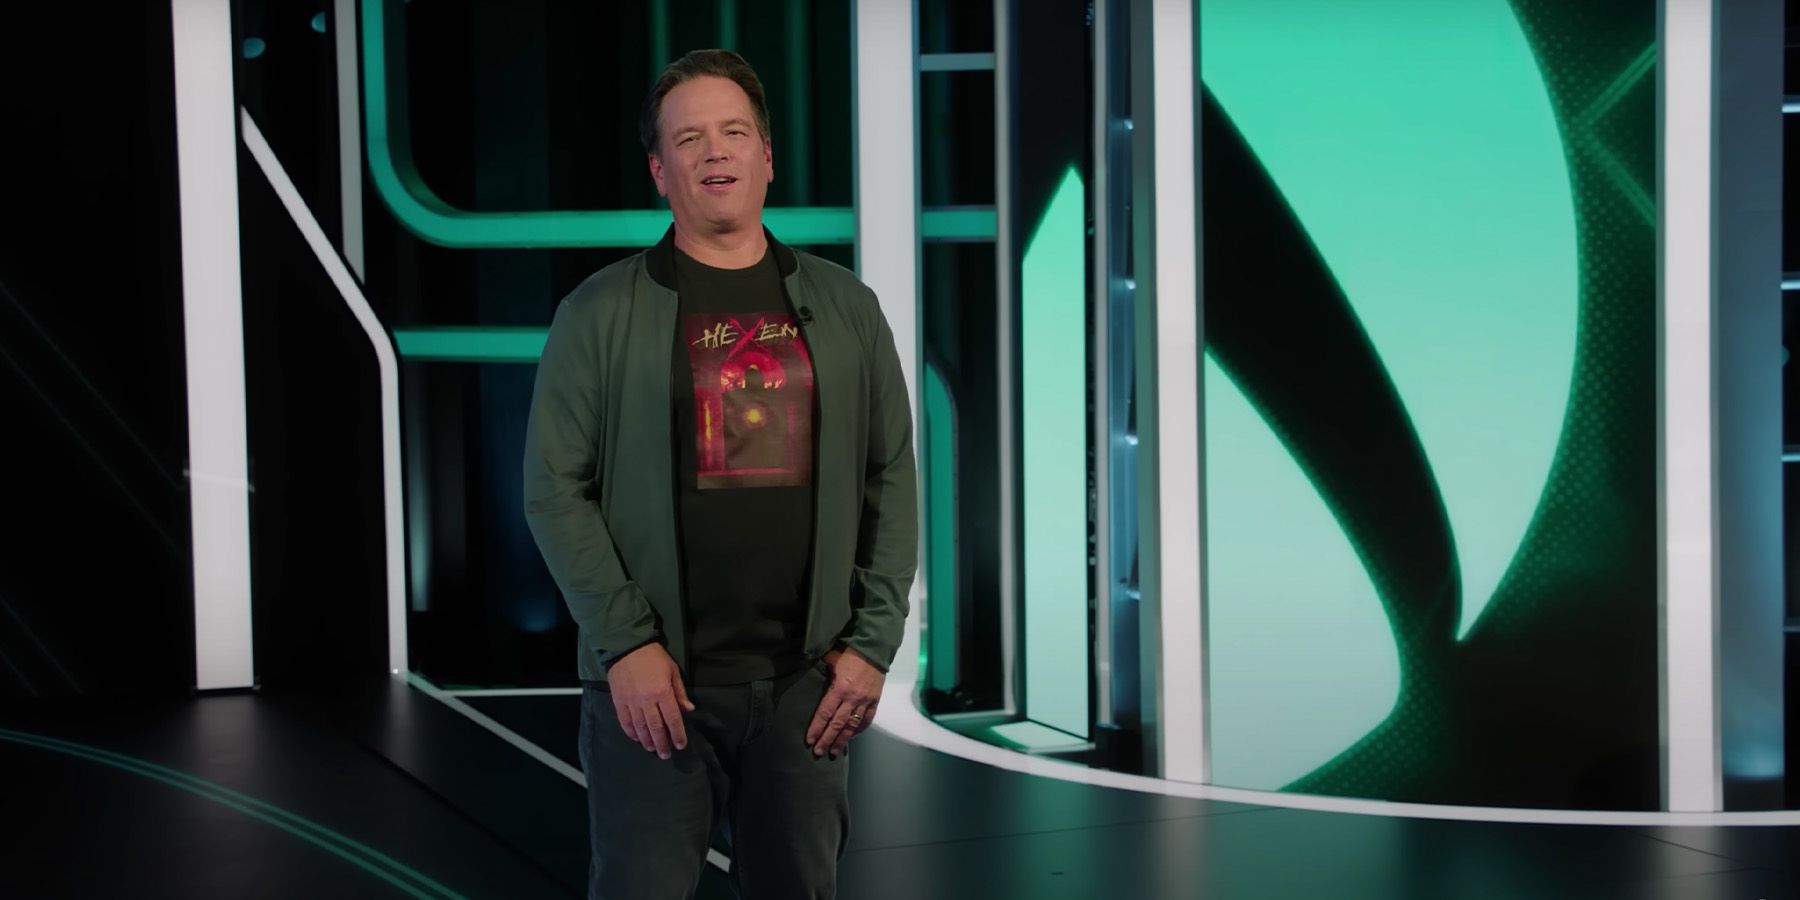 Phil Spencer has addressed massive Xbox leak with a statement